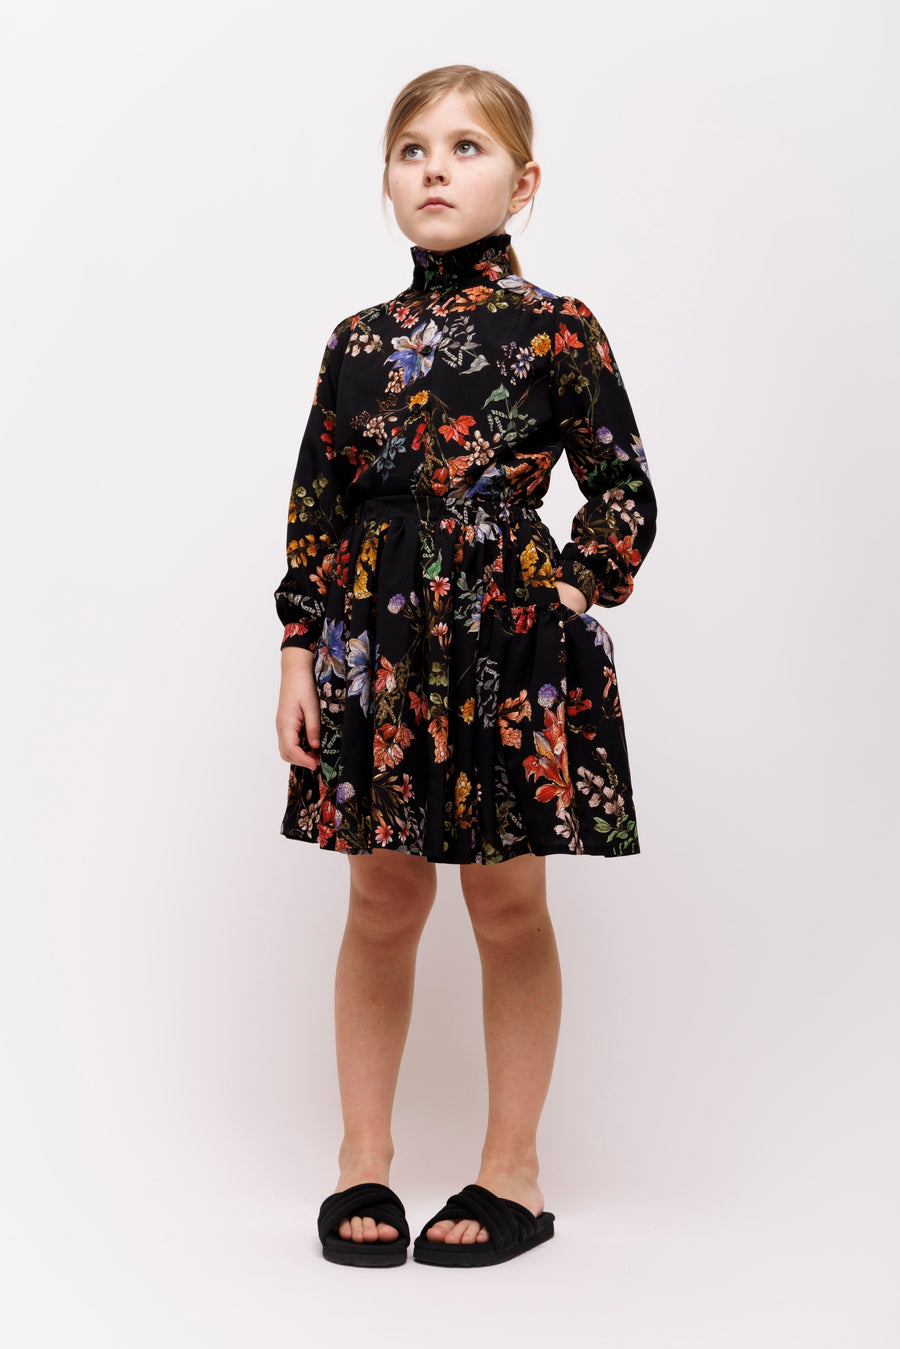 Floral black skirt by Christina Rohde